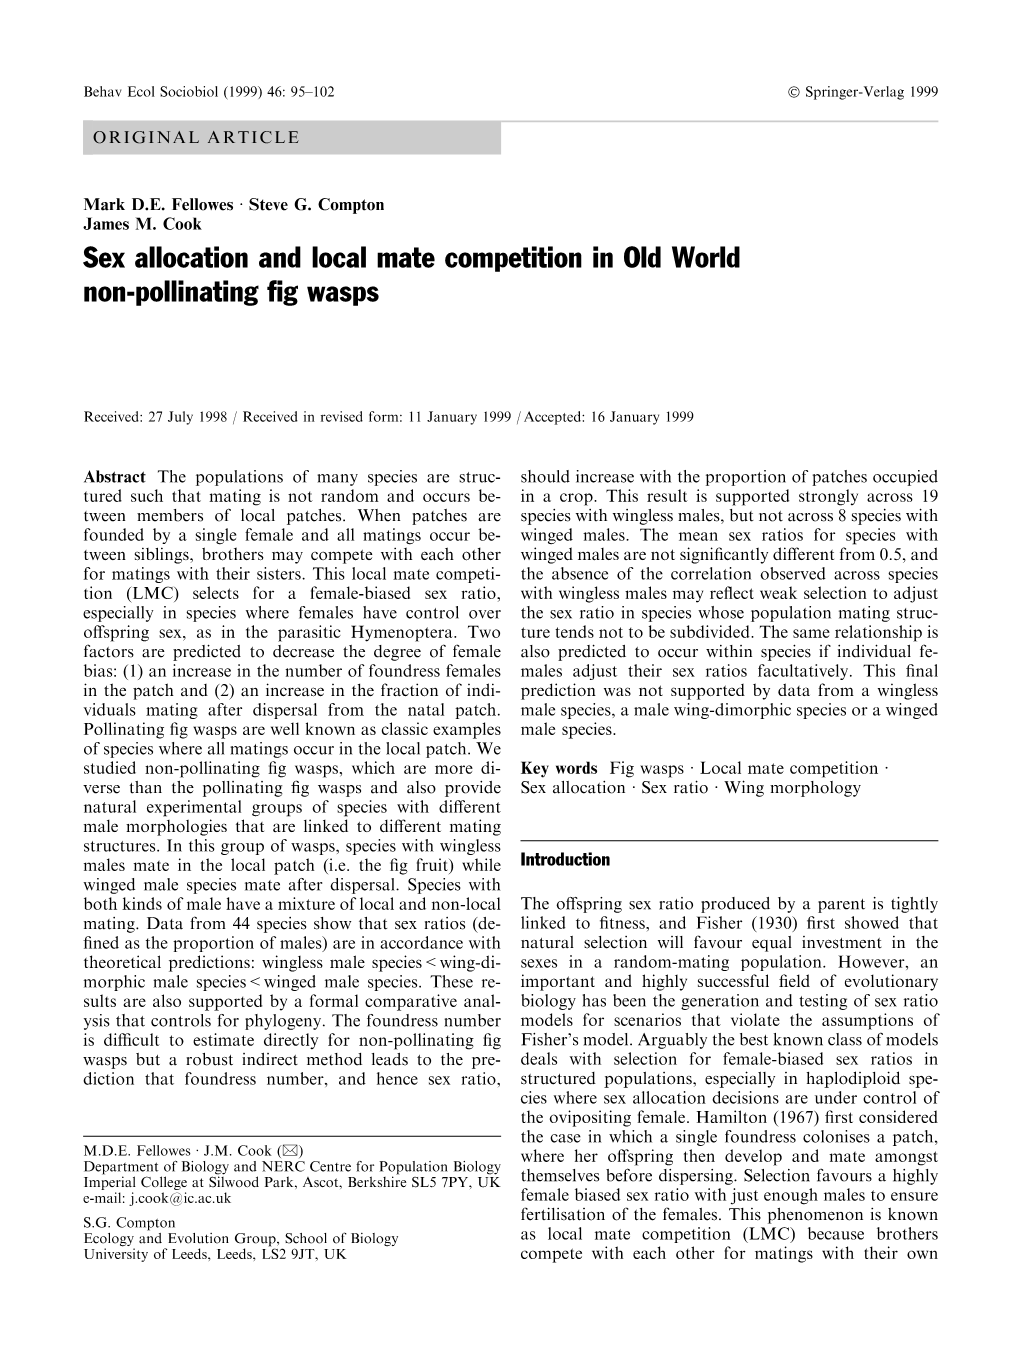 Sex Allocation and Local Mate Competition in Old World Non-Pollinating ®G Wasps